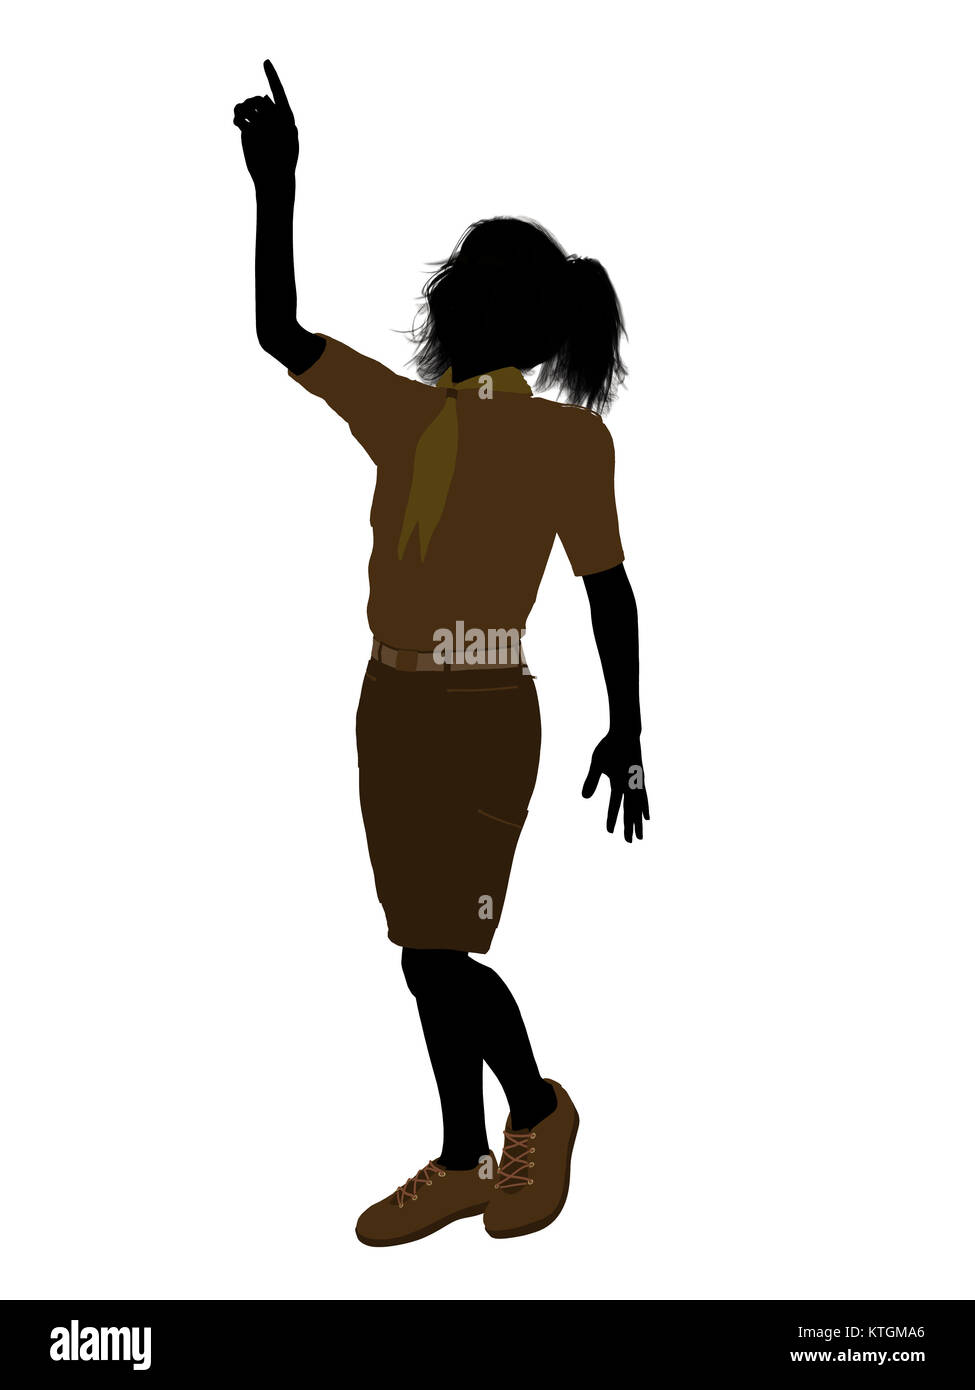 Girl scout silhouette dressed in shorts on a white background Stock Photo